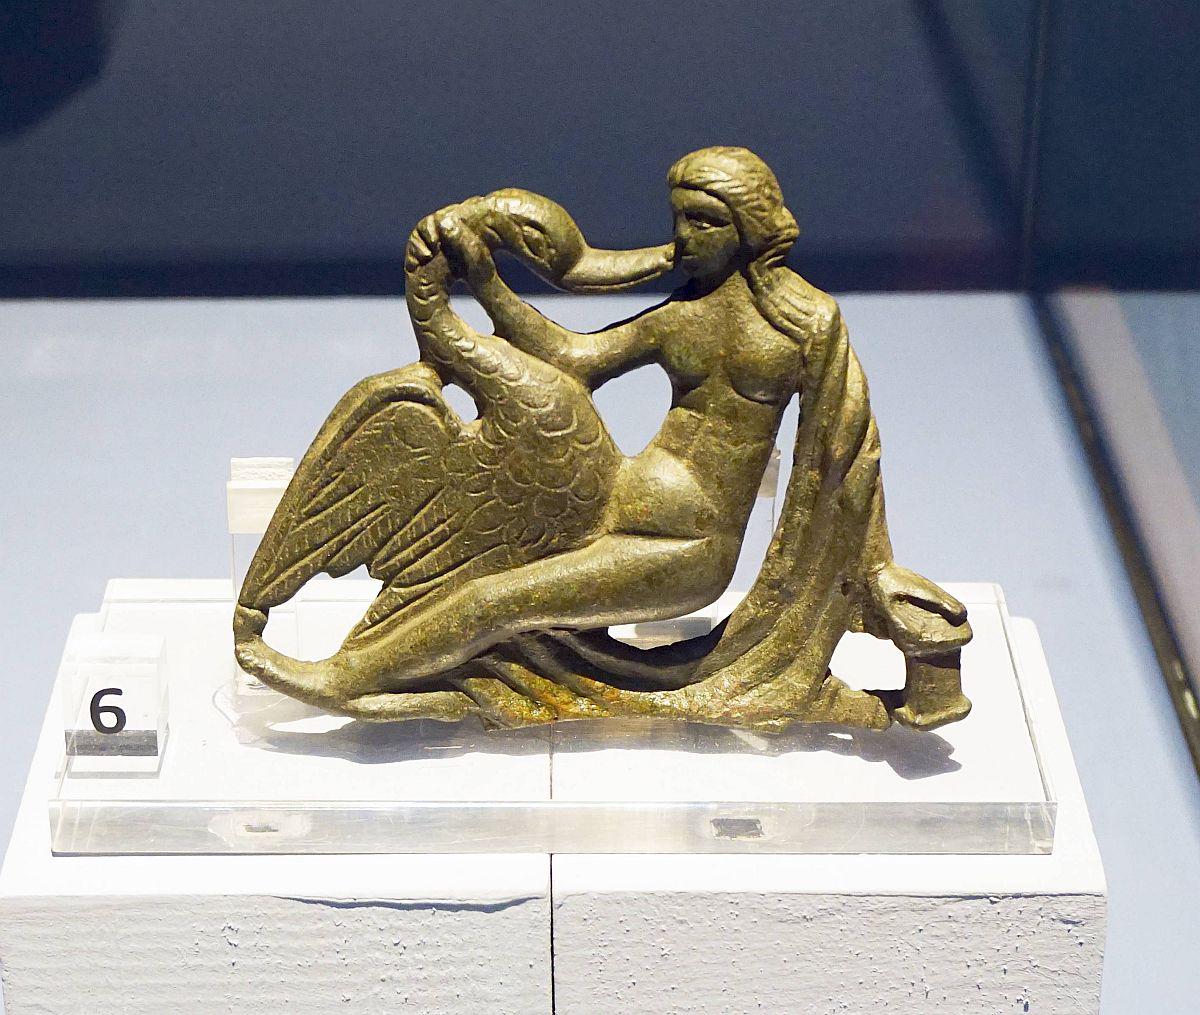 A bronze ornament depicting Leda with a swan. The object is dated to the 3rd-4th century CE and was found in Ostia.jpeg